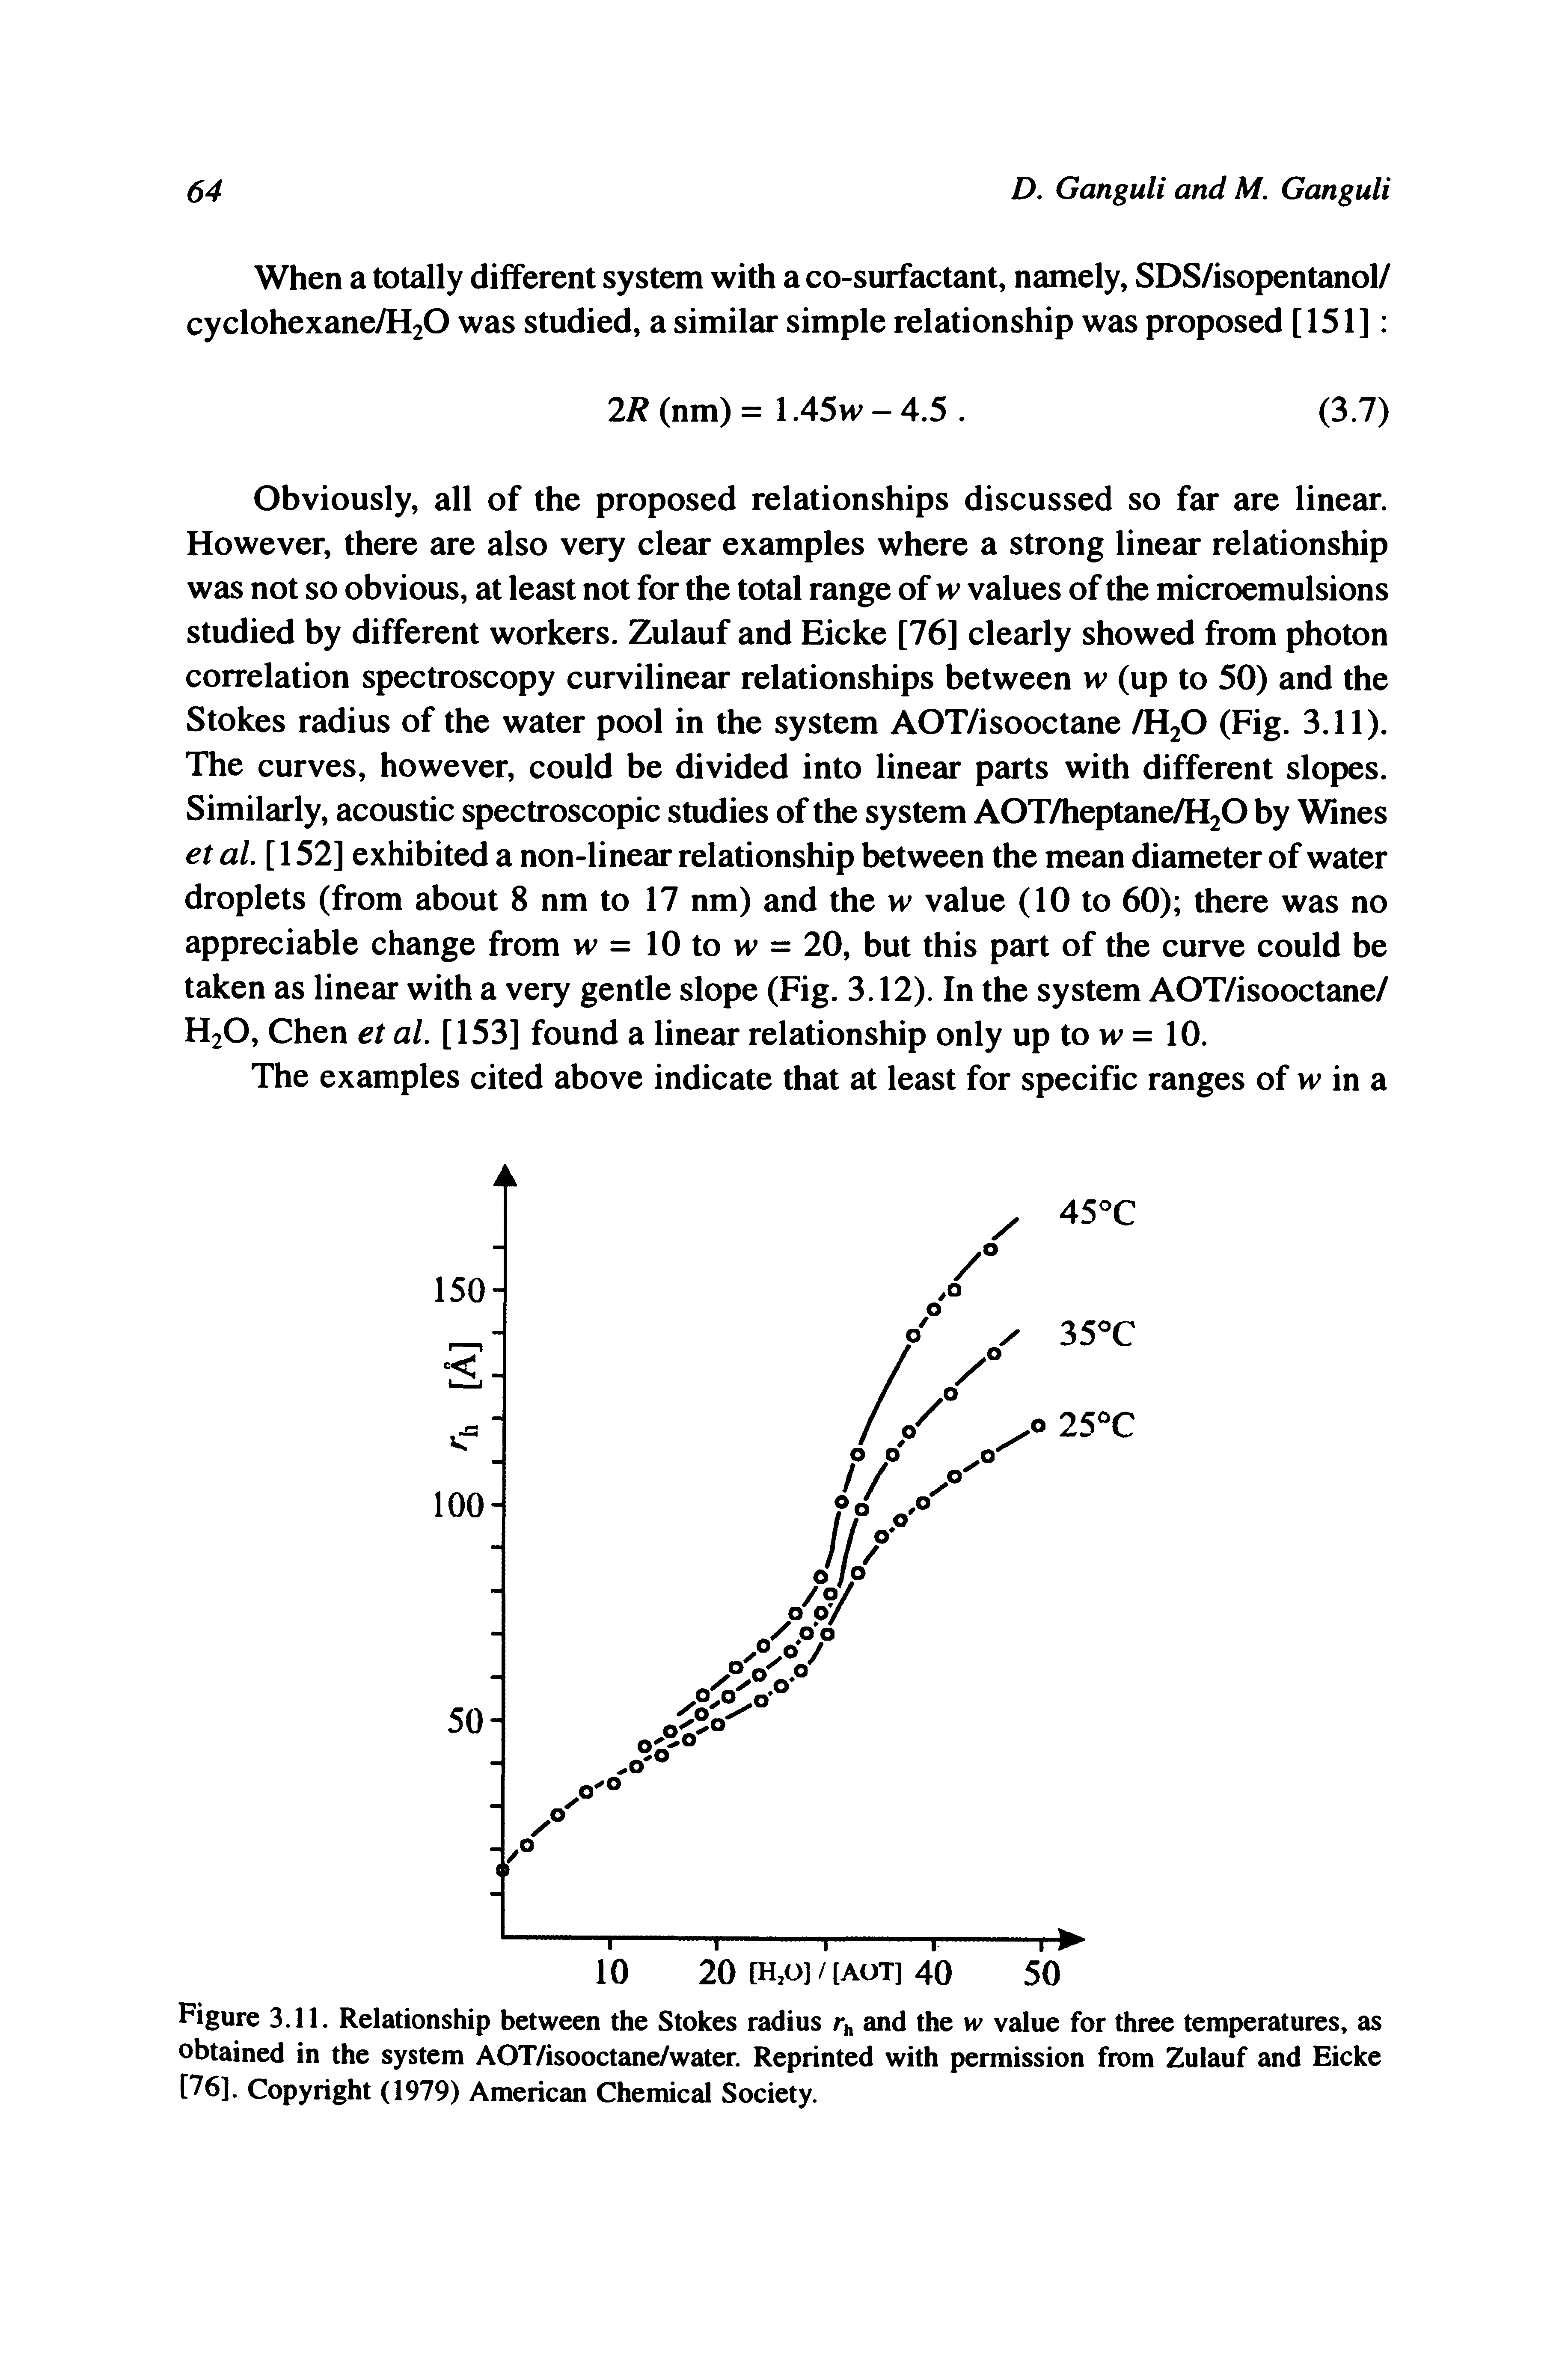 Figure 3.11. Relationship between the Stokes radius and the w value for three temperatures, as obtained in the system AOT/isooctane/water. Reprinted with permission from Zulauf and Eicke [76], Copyright (1979) American Chemical Society.